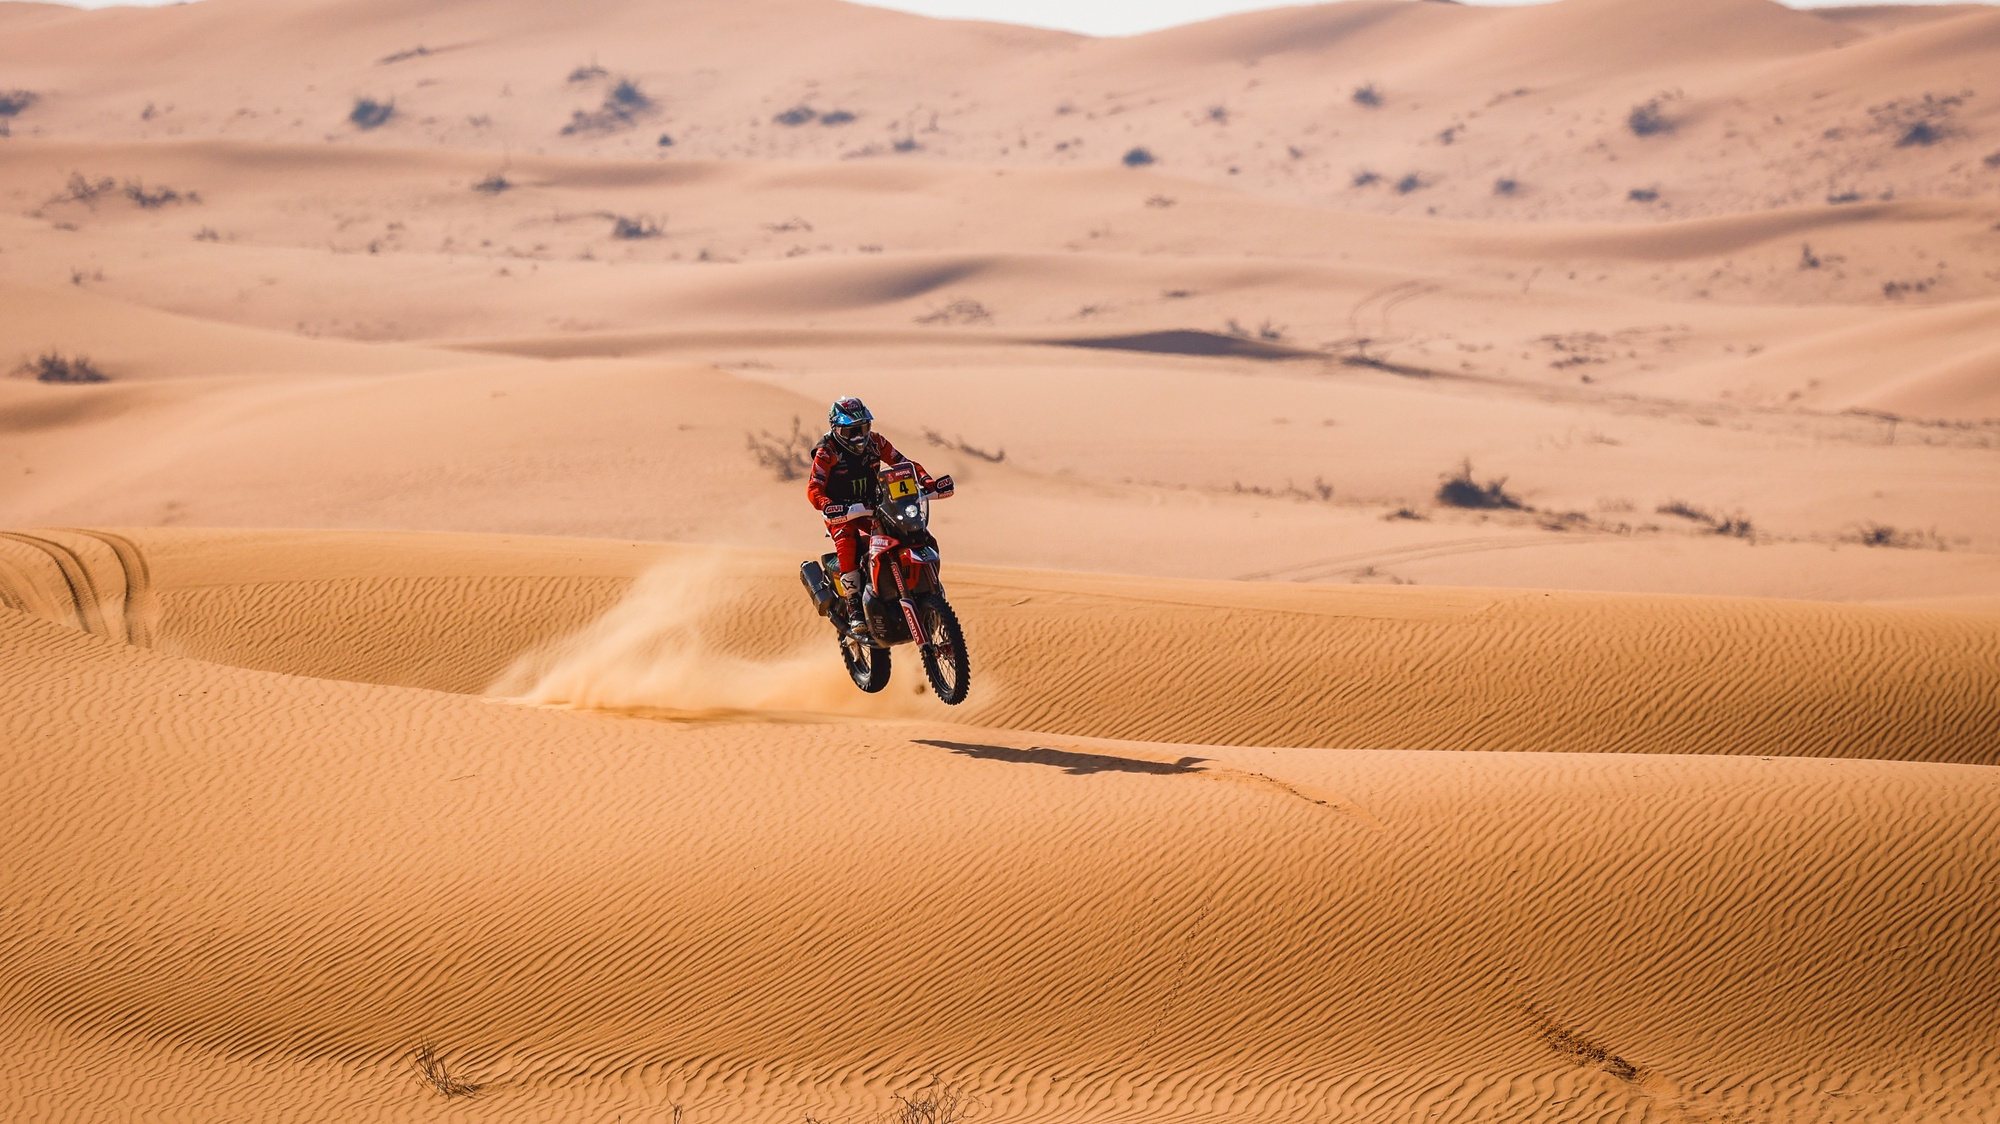 epa08926305 A handout photo made available by ASO of Jose Ignacio Cornejo Florimo of Chile, Honda, Monster Energy Honda Team 2021, in action during the 6th stage of the Dakar 2021 between Al Qaisumah and Ha&#039;il, in Saudi Arabia on January 8, 2021.  EPA/Florent Gooden HANDOUT via ASO SHUTTERSTOCK OUT HANDOUT EDITORIAL USE ONLY/NO SALES/NO ARCHIVES